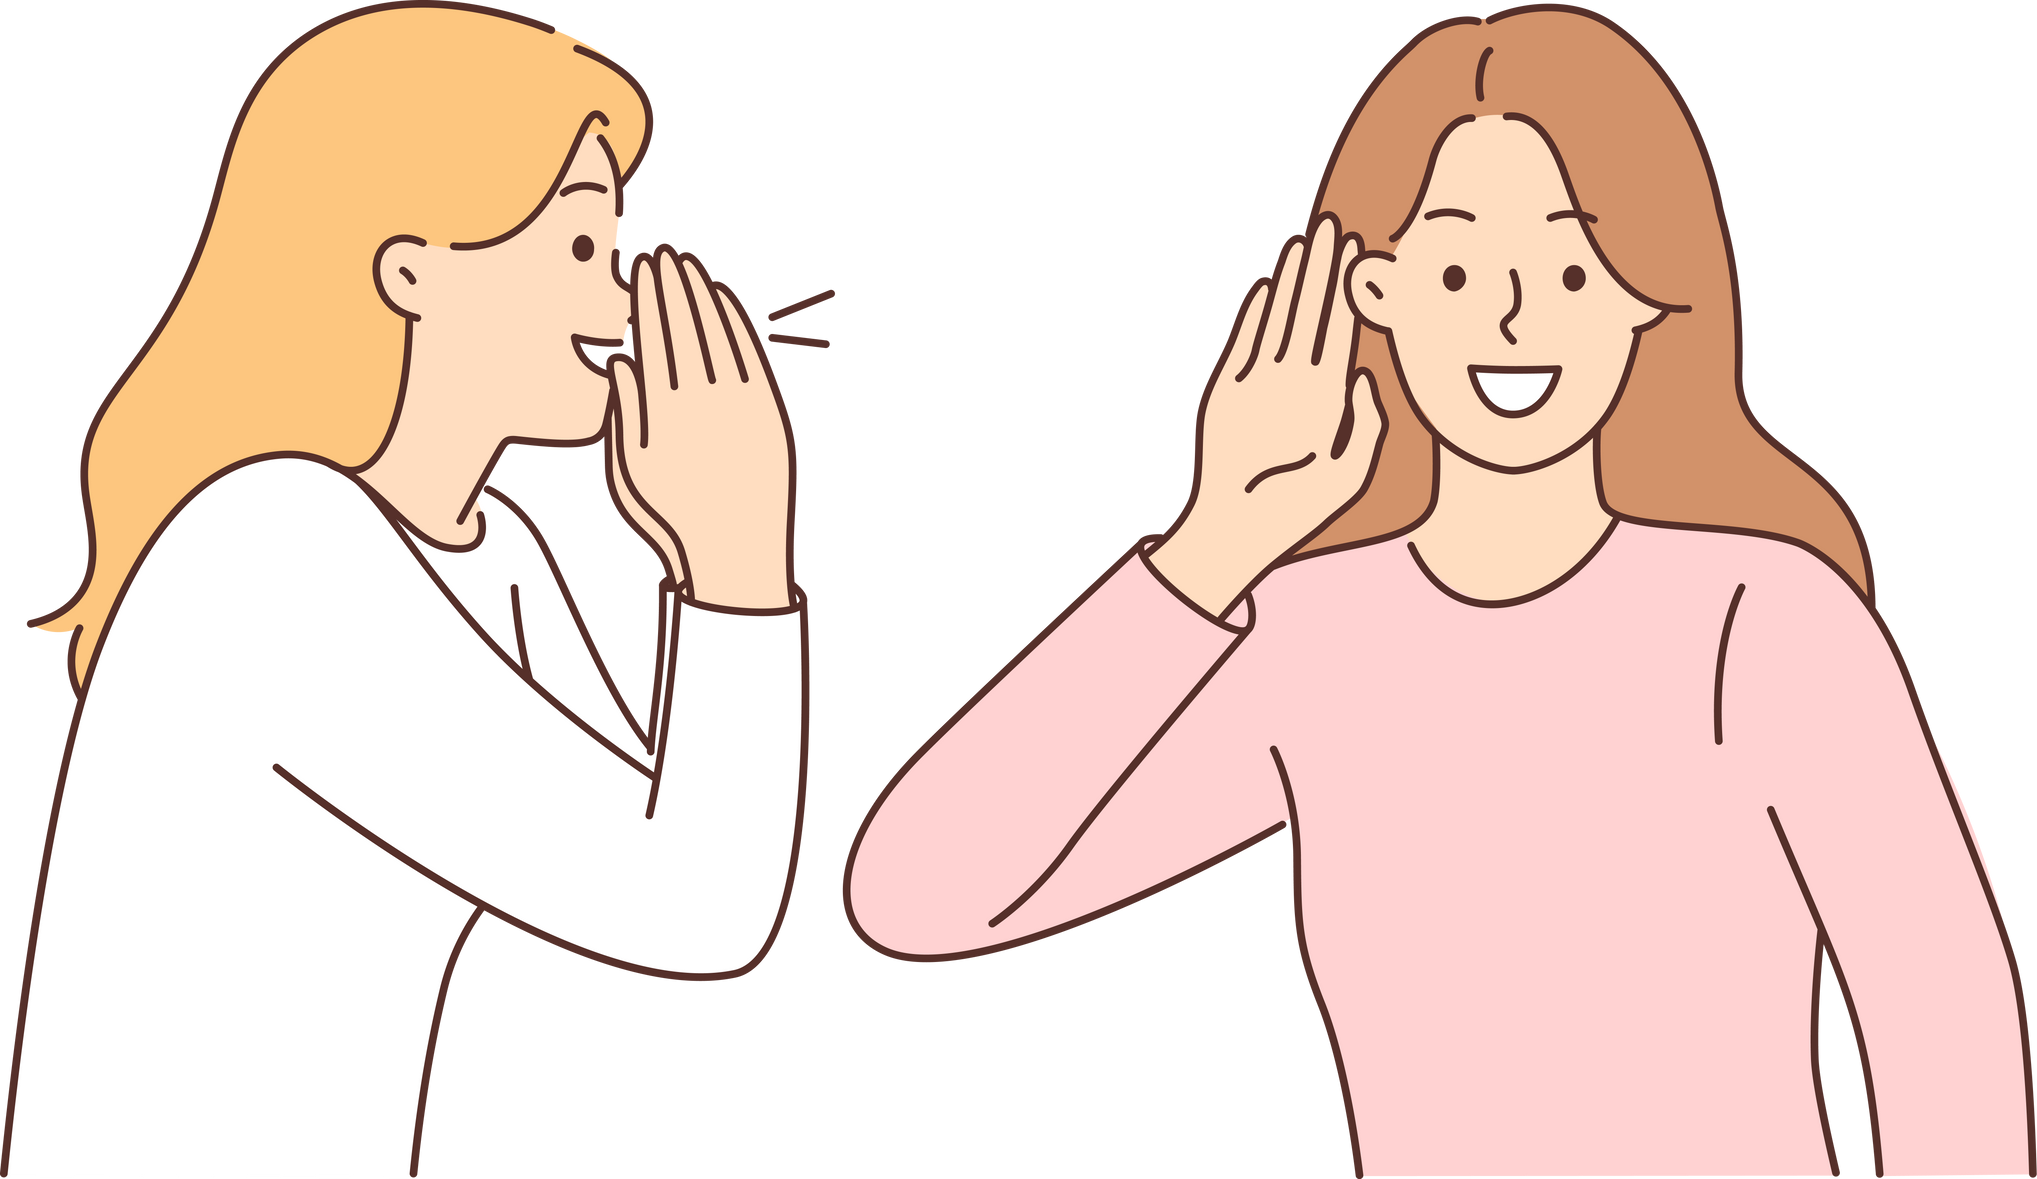 Woman screams to tell interesting news to female friend, puts hand to ear during conversation